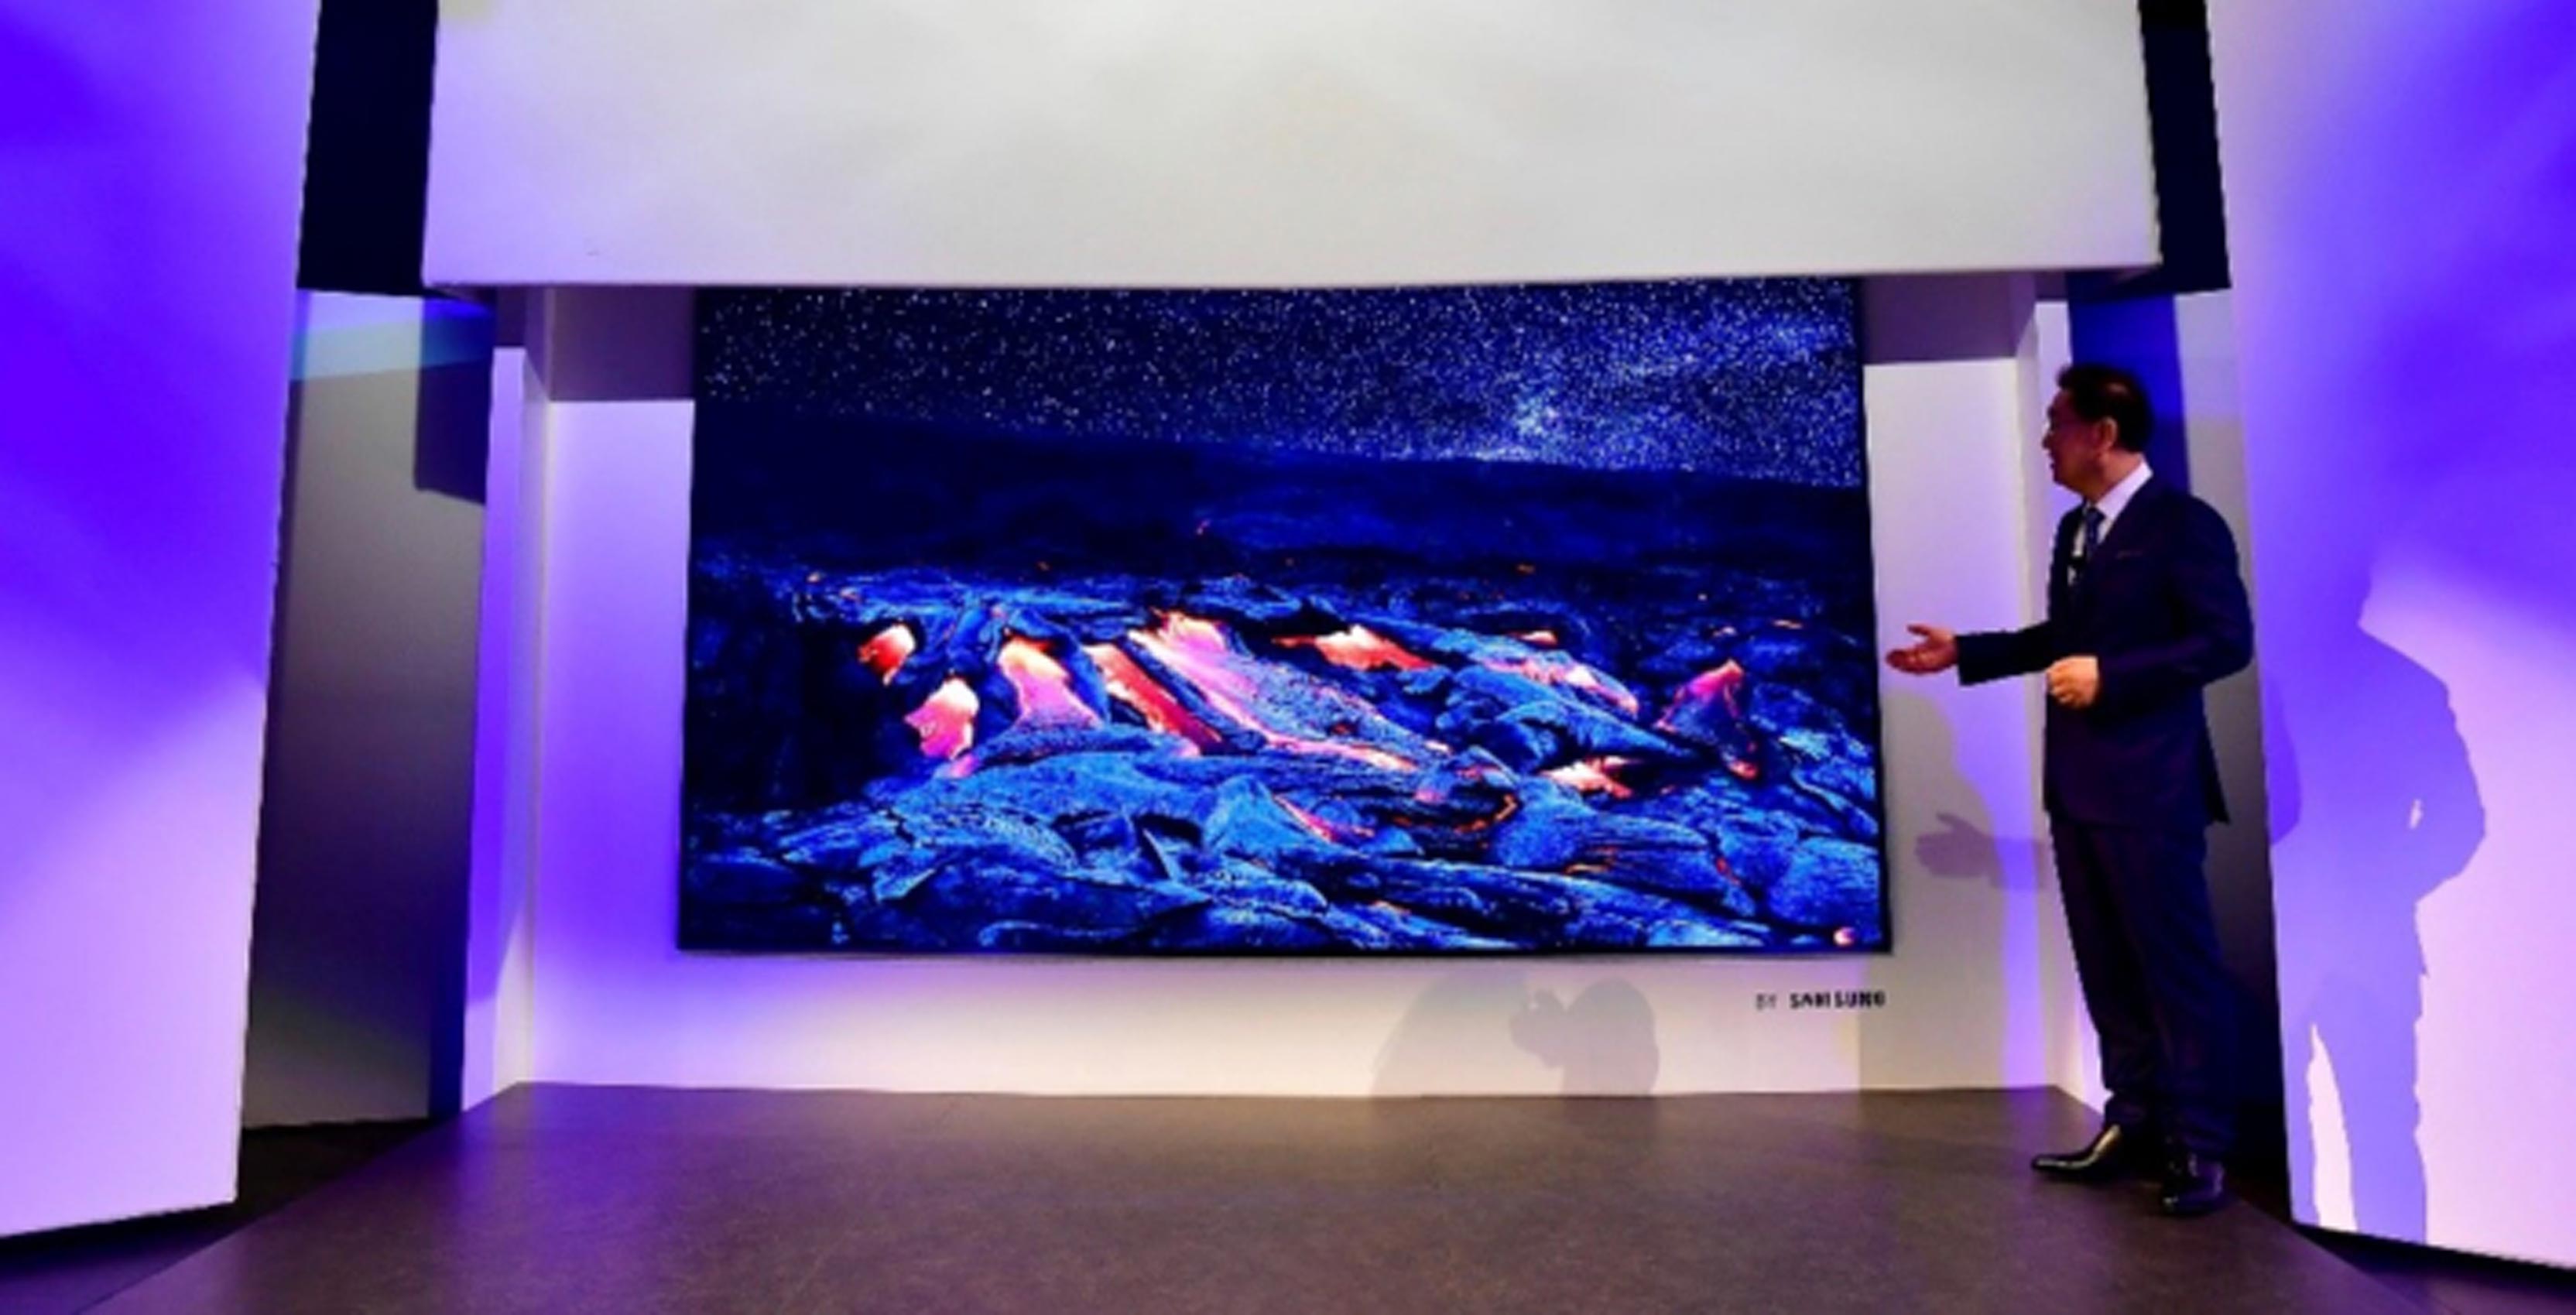 Samsung's new 146-inch MicroLED TV, The Wall